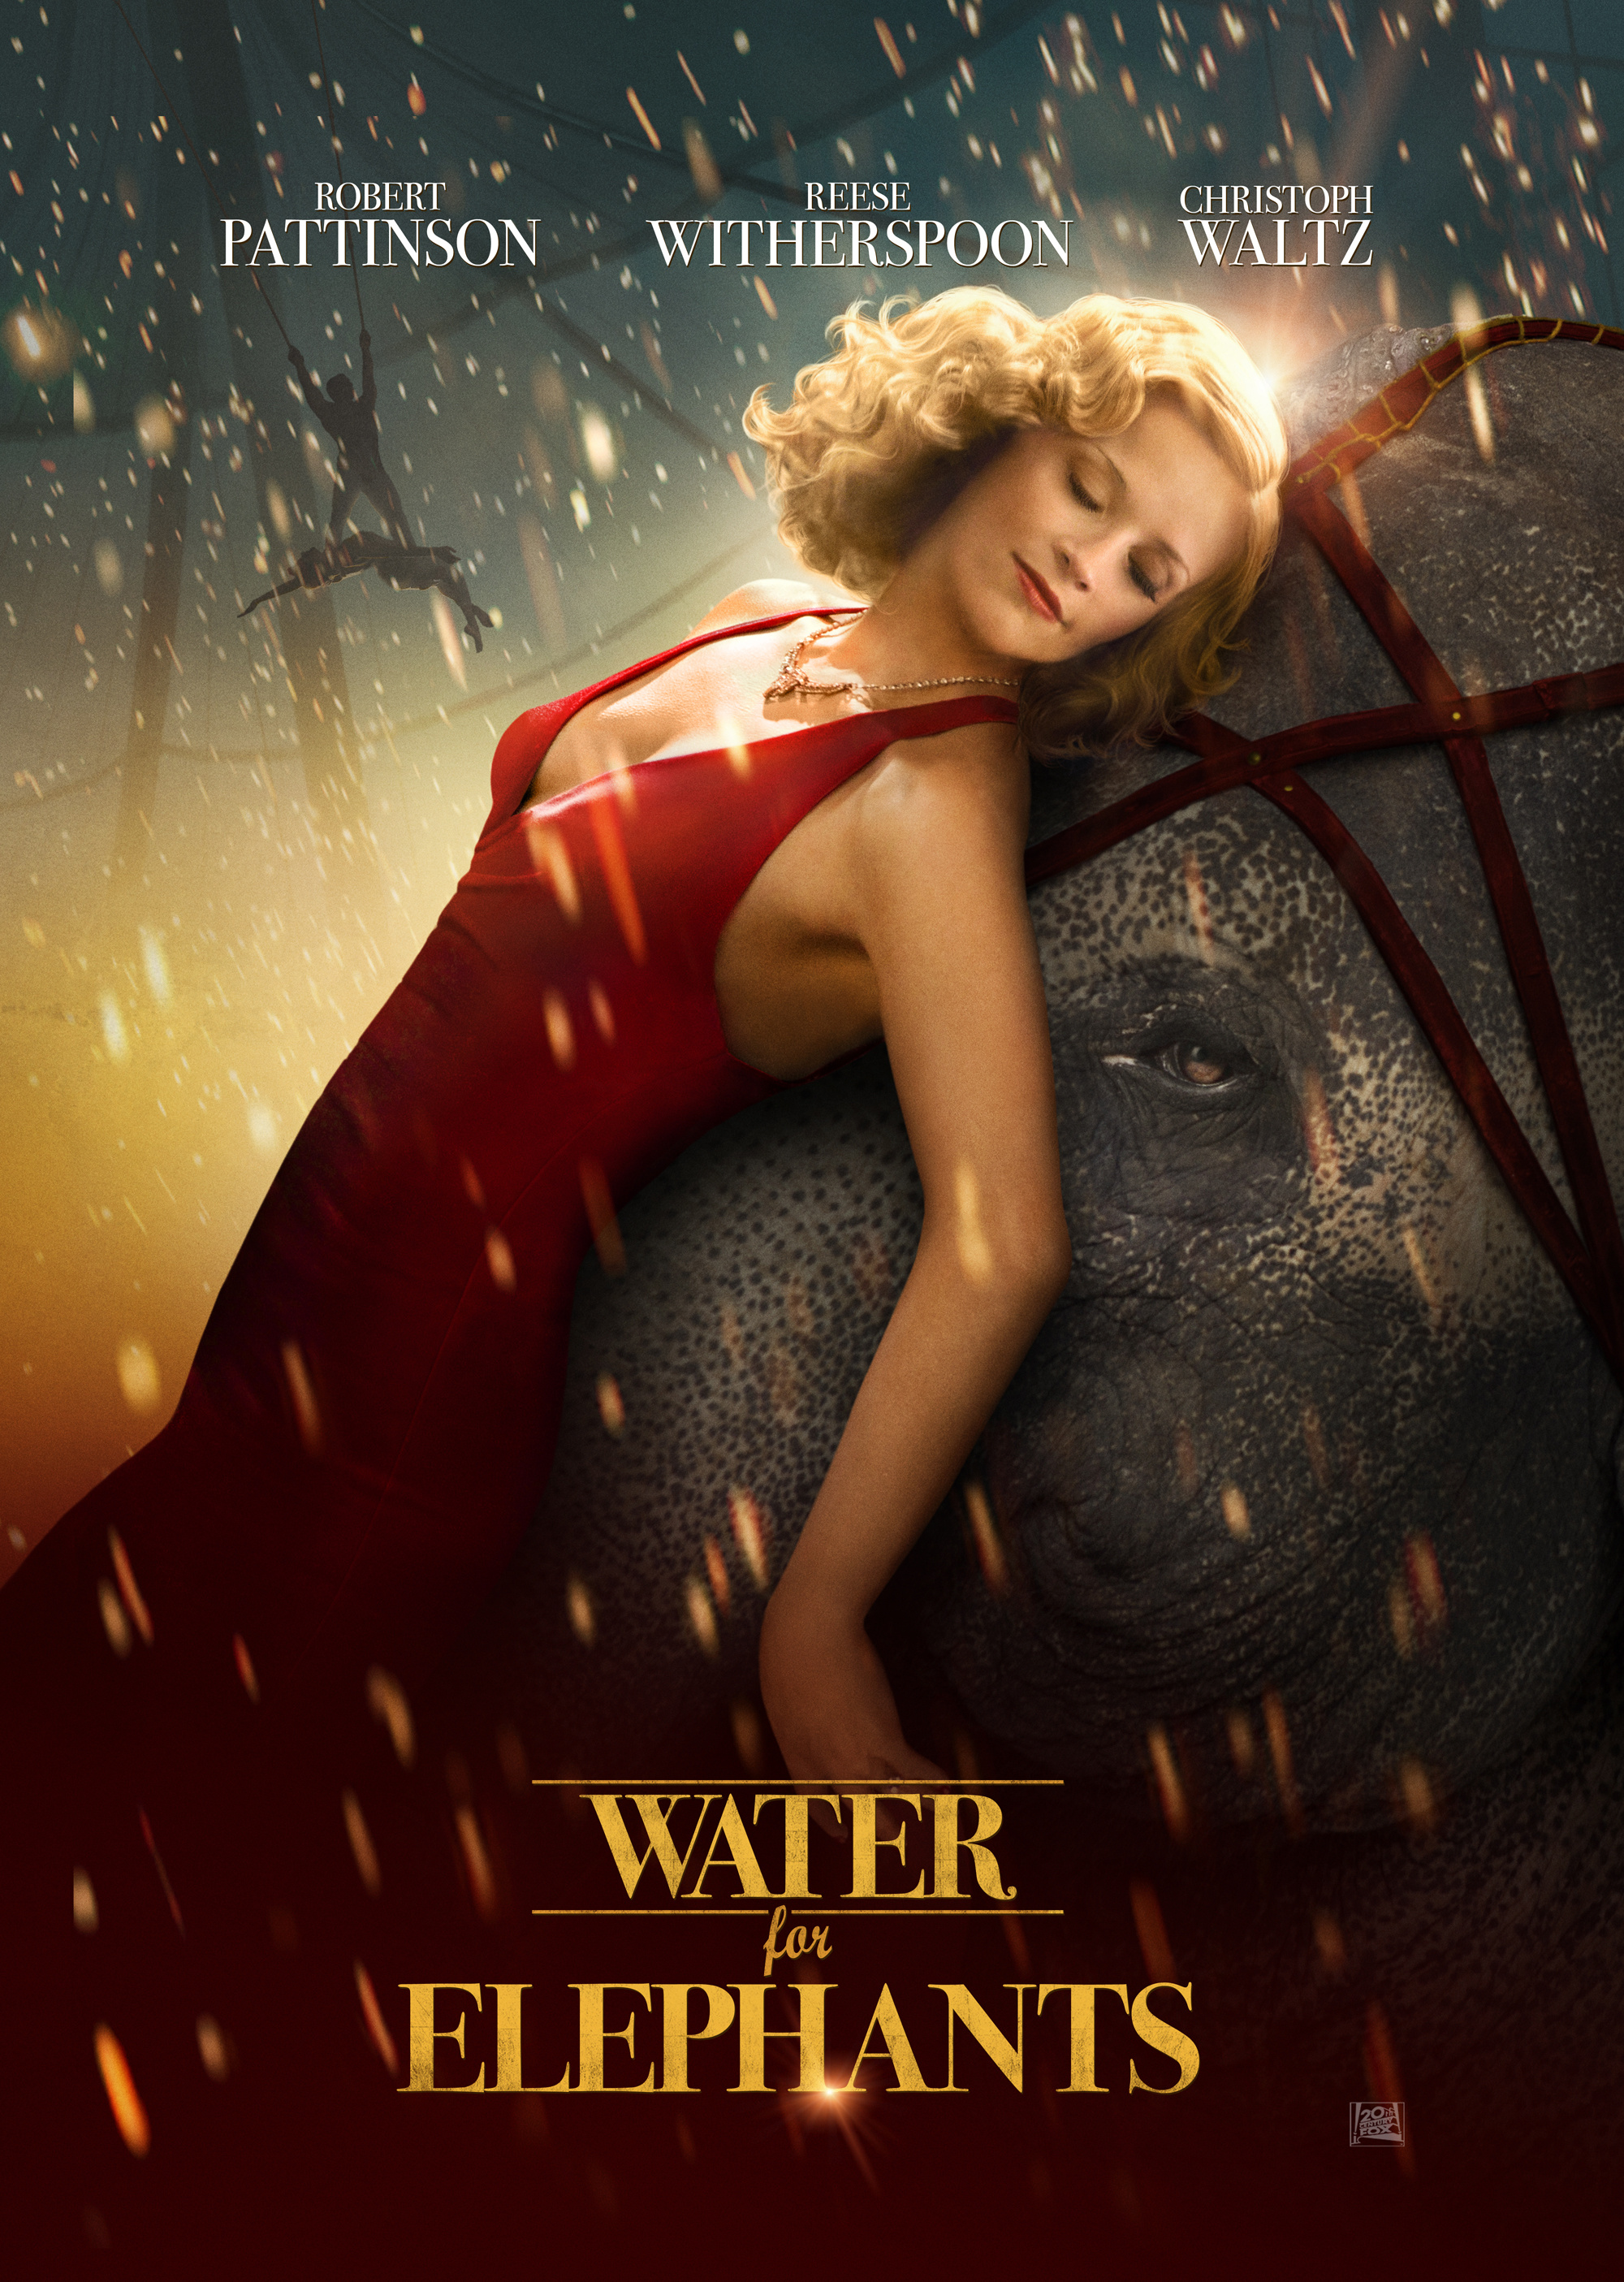 Water for Elephants, High-quality pictures, Movie wallpapers, 4k resolution, 2000x2810 HD Handy